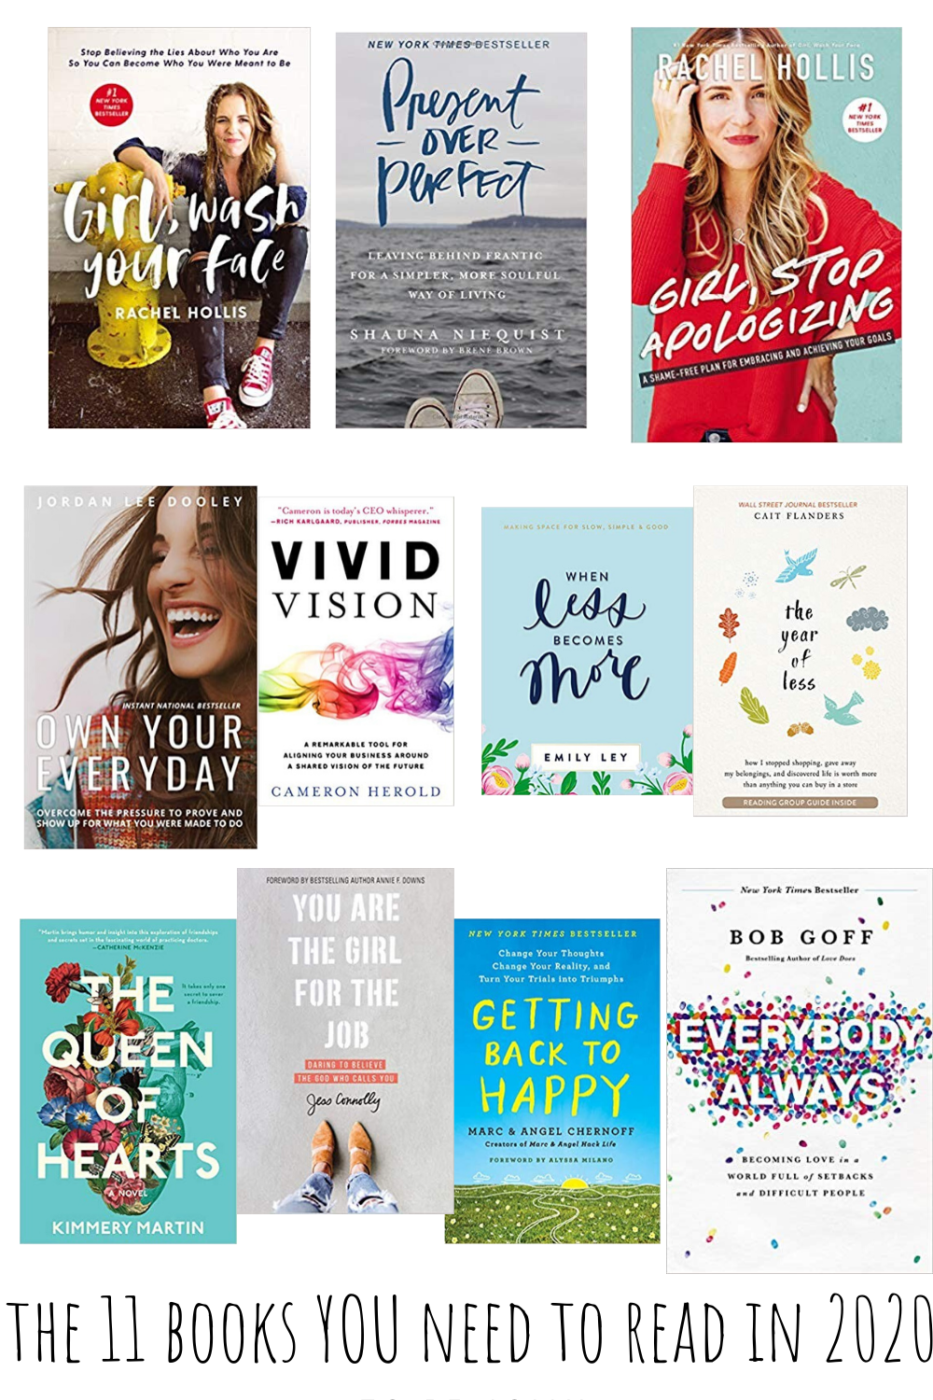 20 Ways to Make 2020 your Year and the 11 Books You Need to Read in 2020!